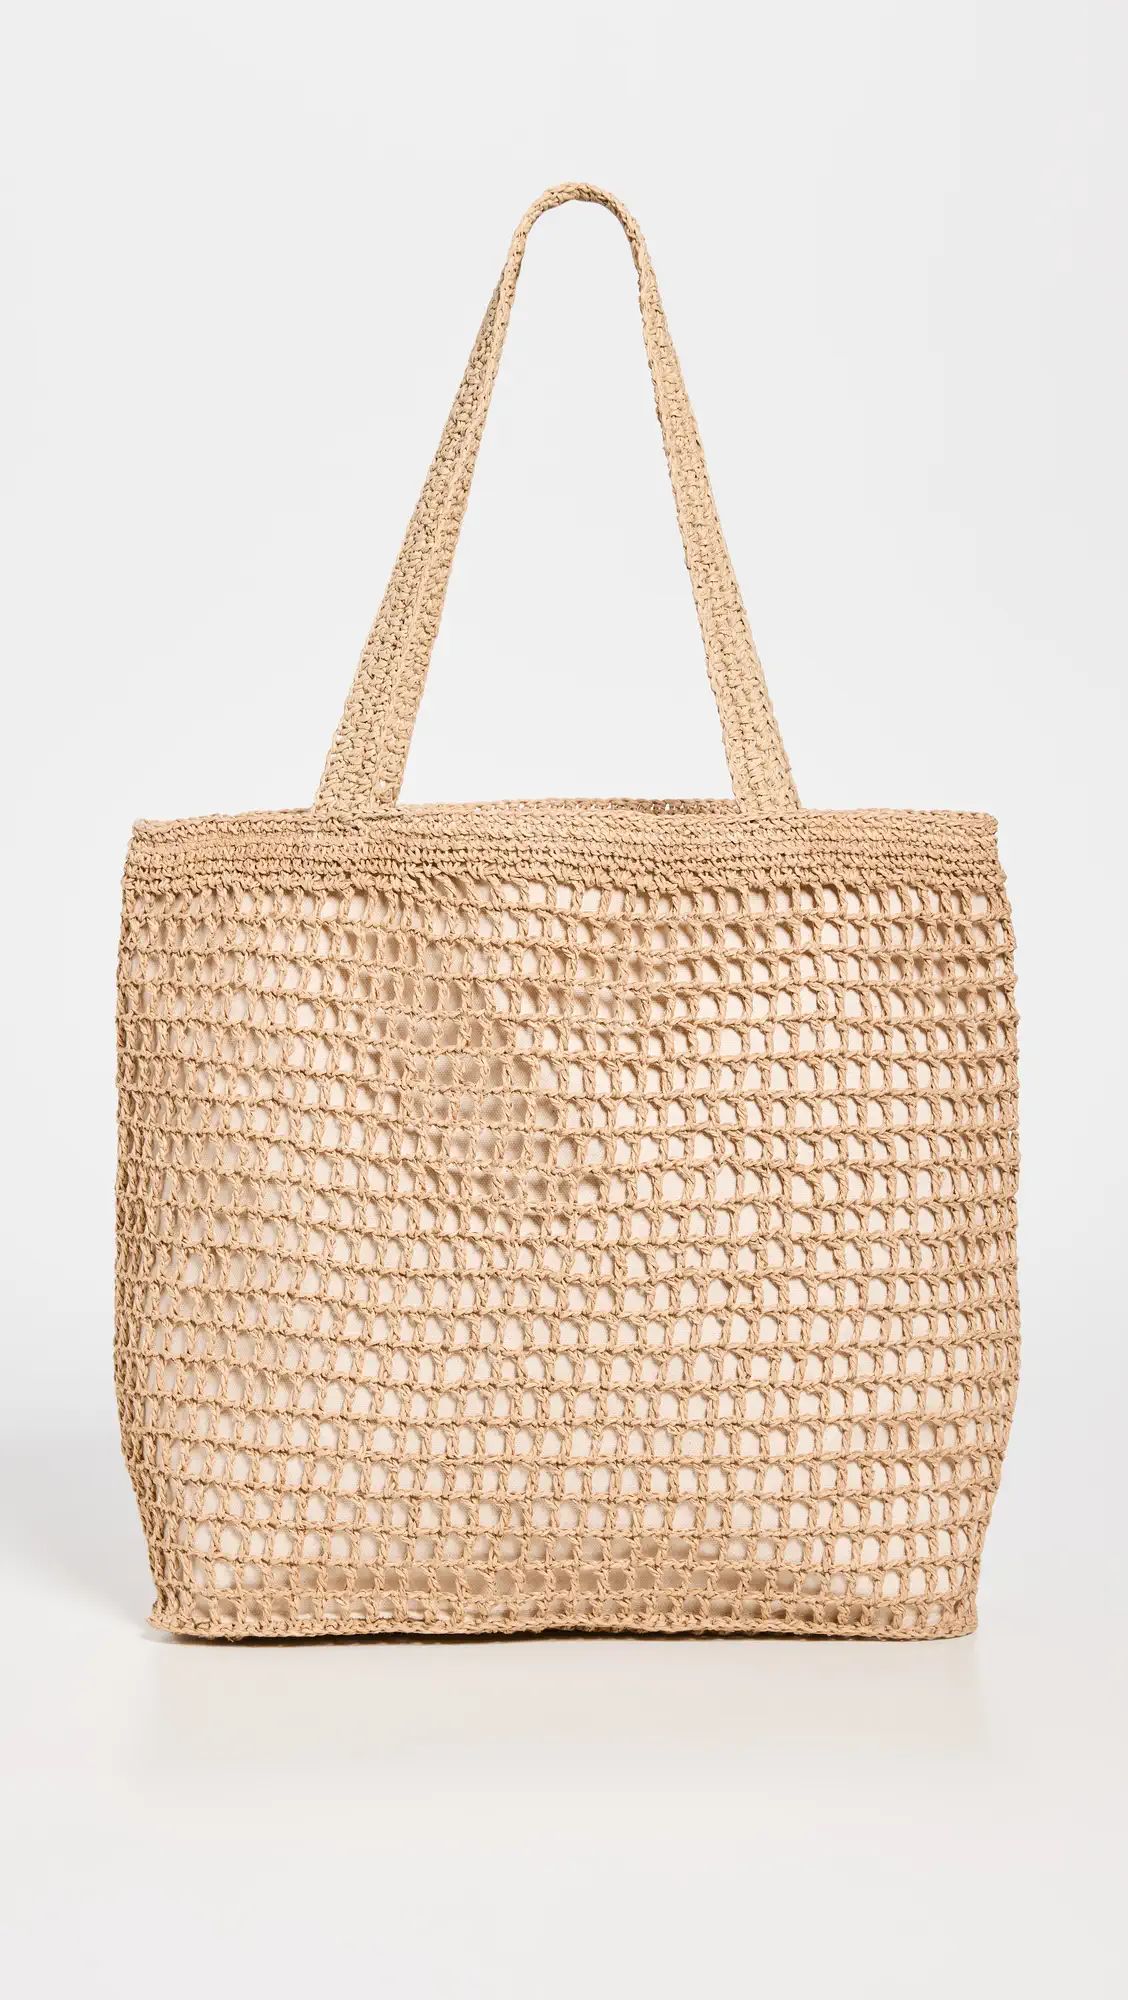 The Transport Tote: Straw Edition | Shopbop